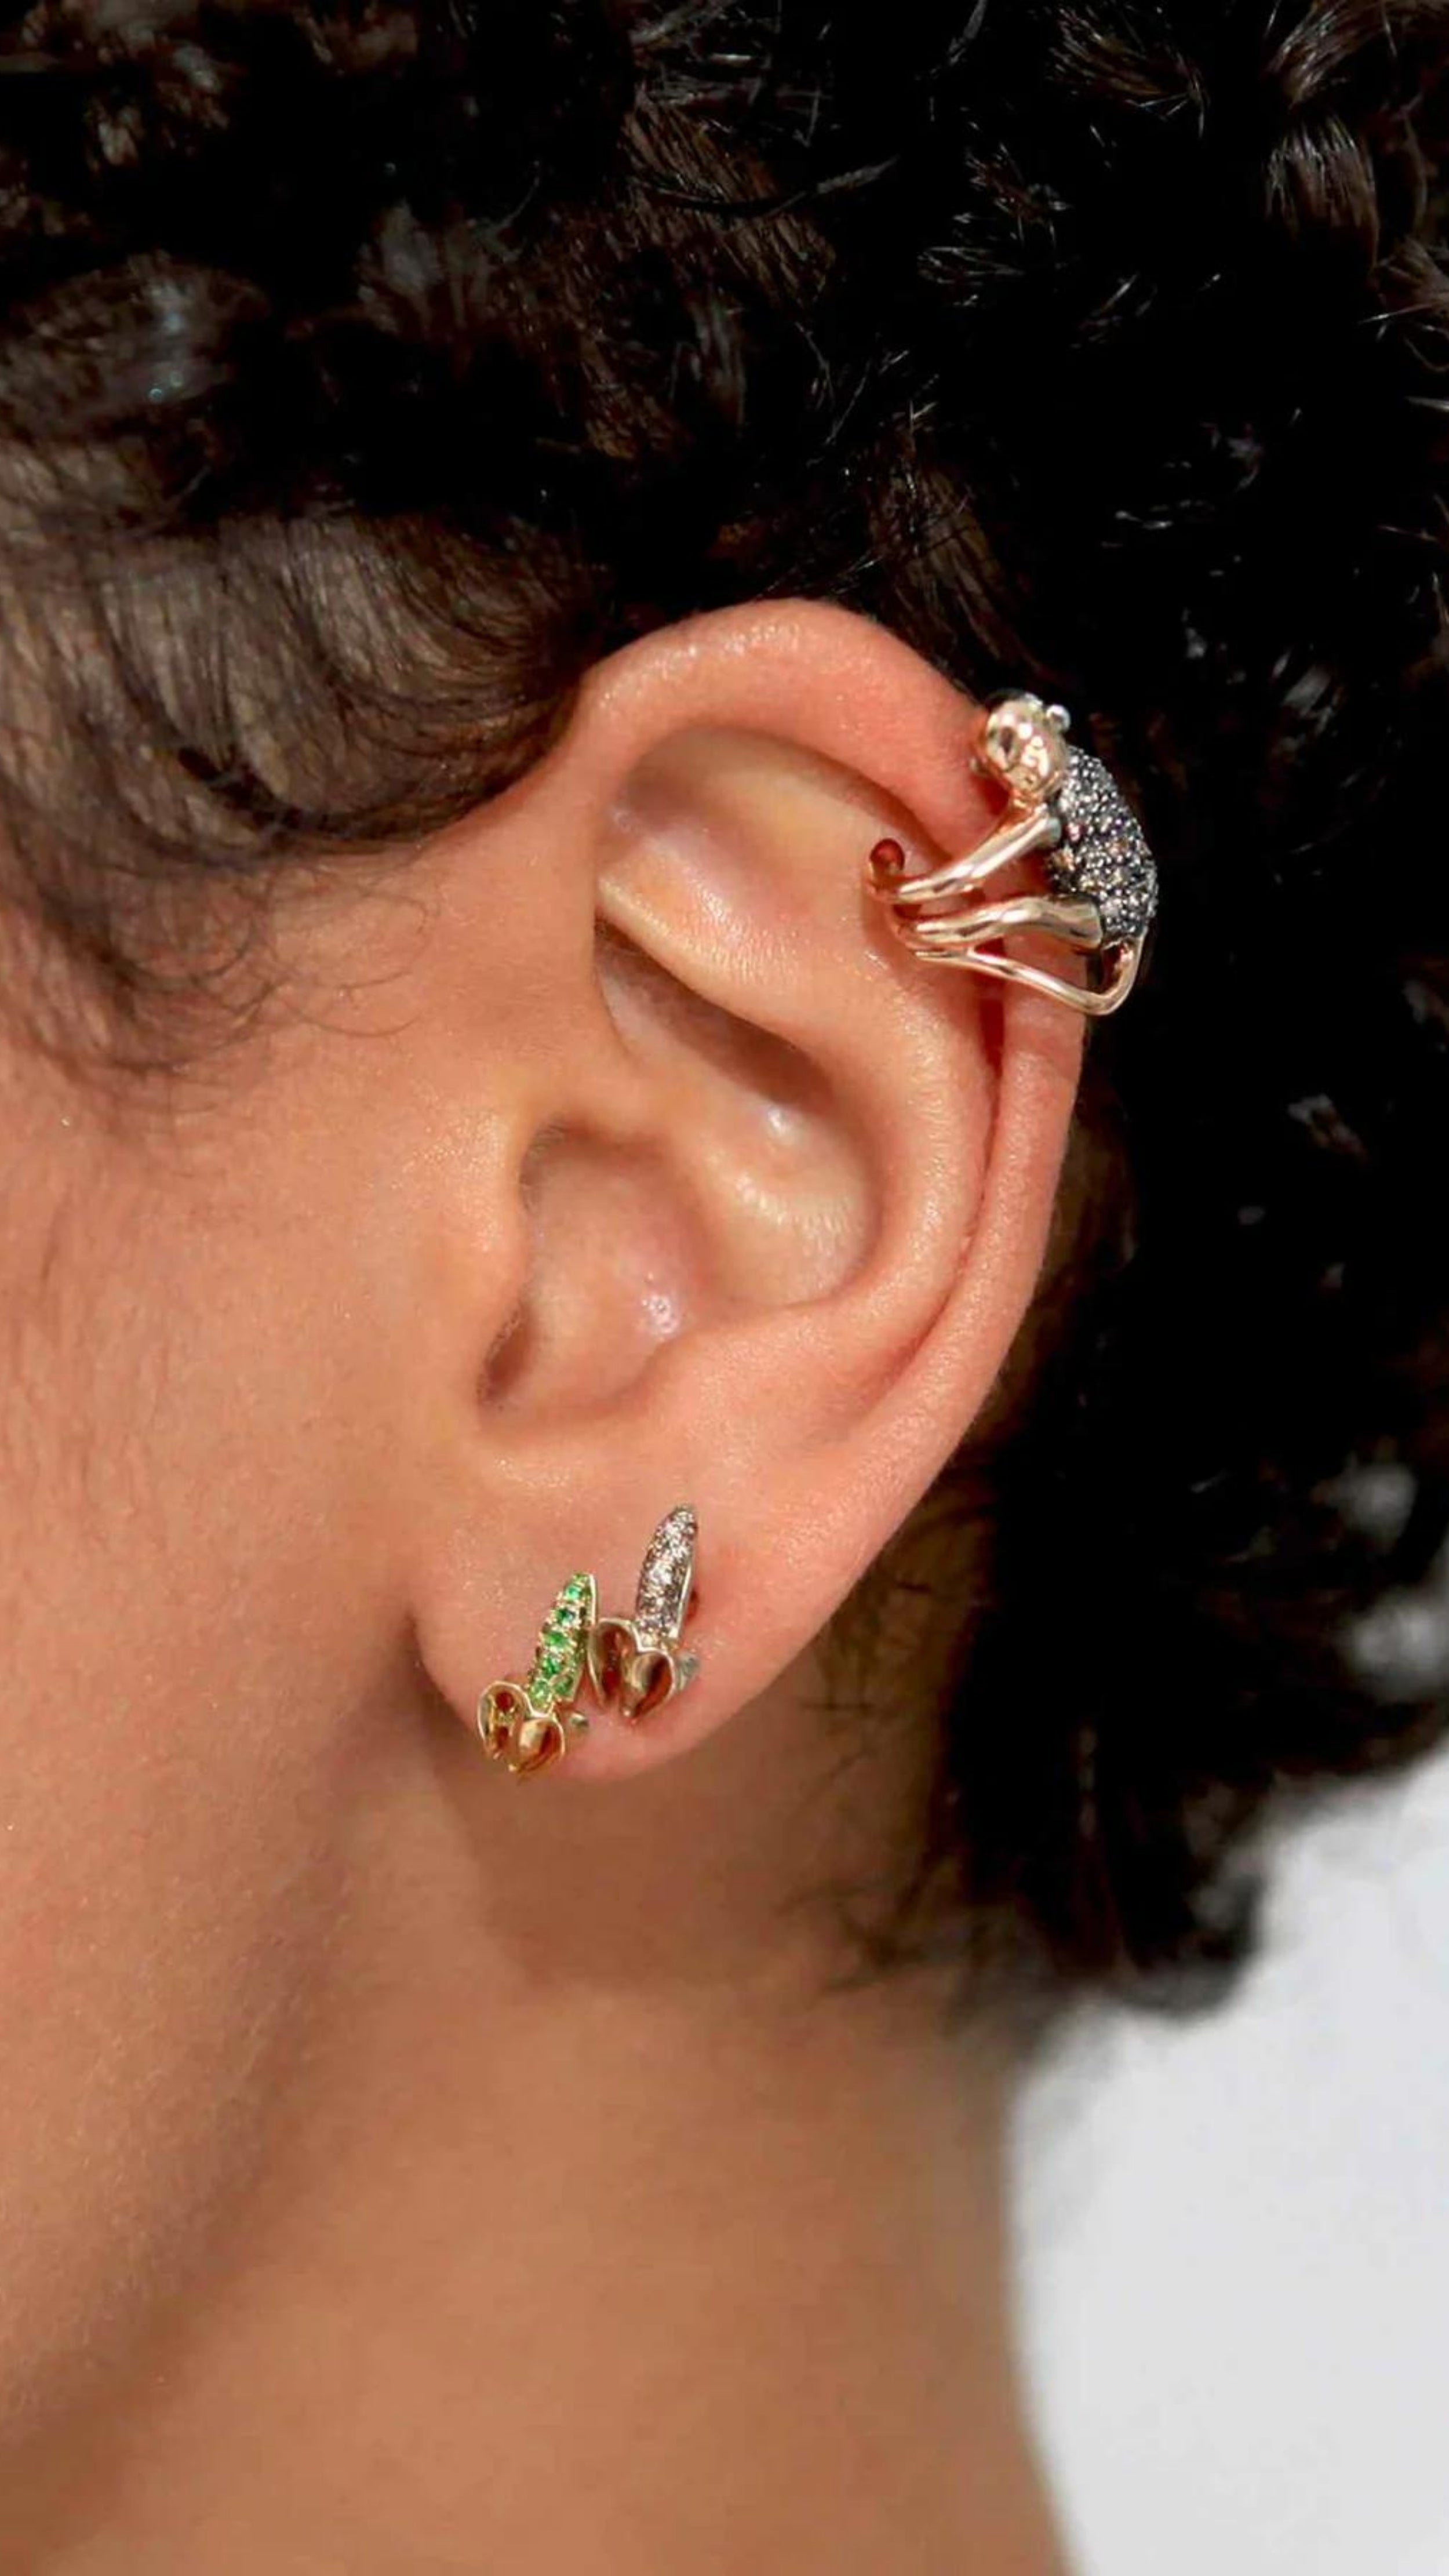 Bibi van der Velden Monkey Mini Banana Stud in Diamond. Single stud earring crafted in the shape of a partially peeled banana. The peel is made from 18K gold and the banana is pave with diamonds. Stud. Photo shows earring being worn by a model.